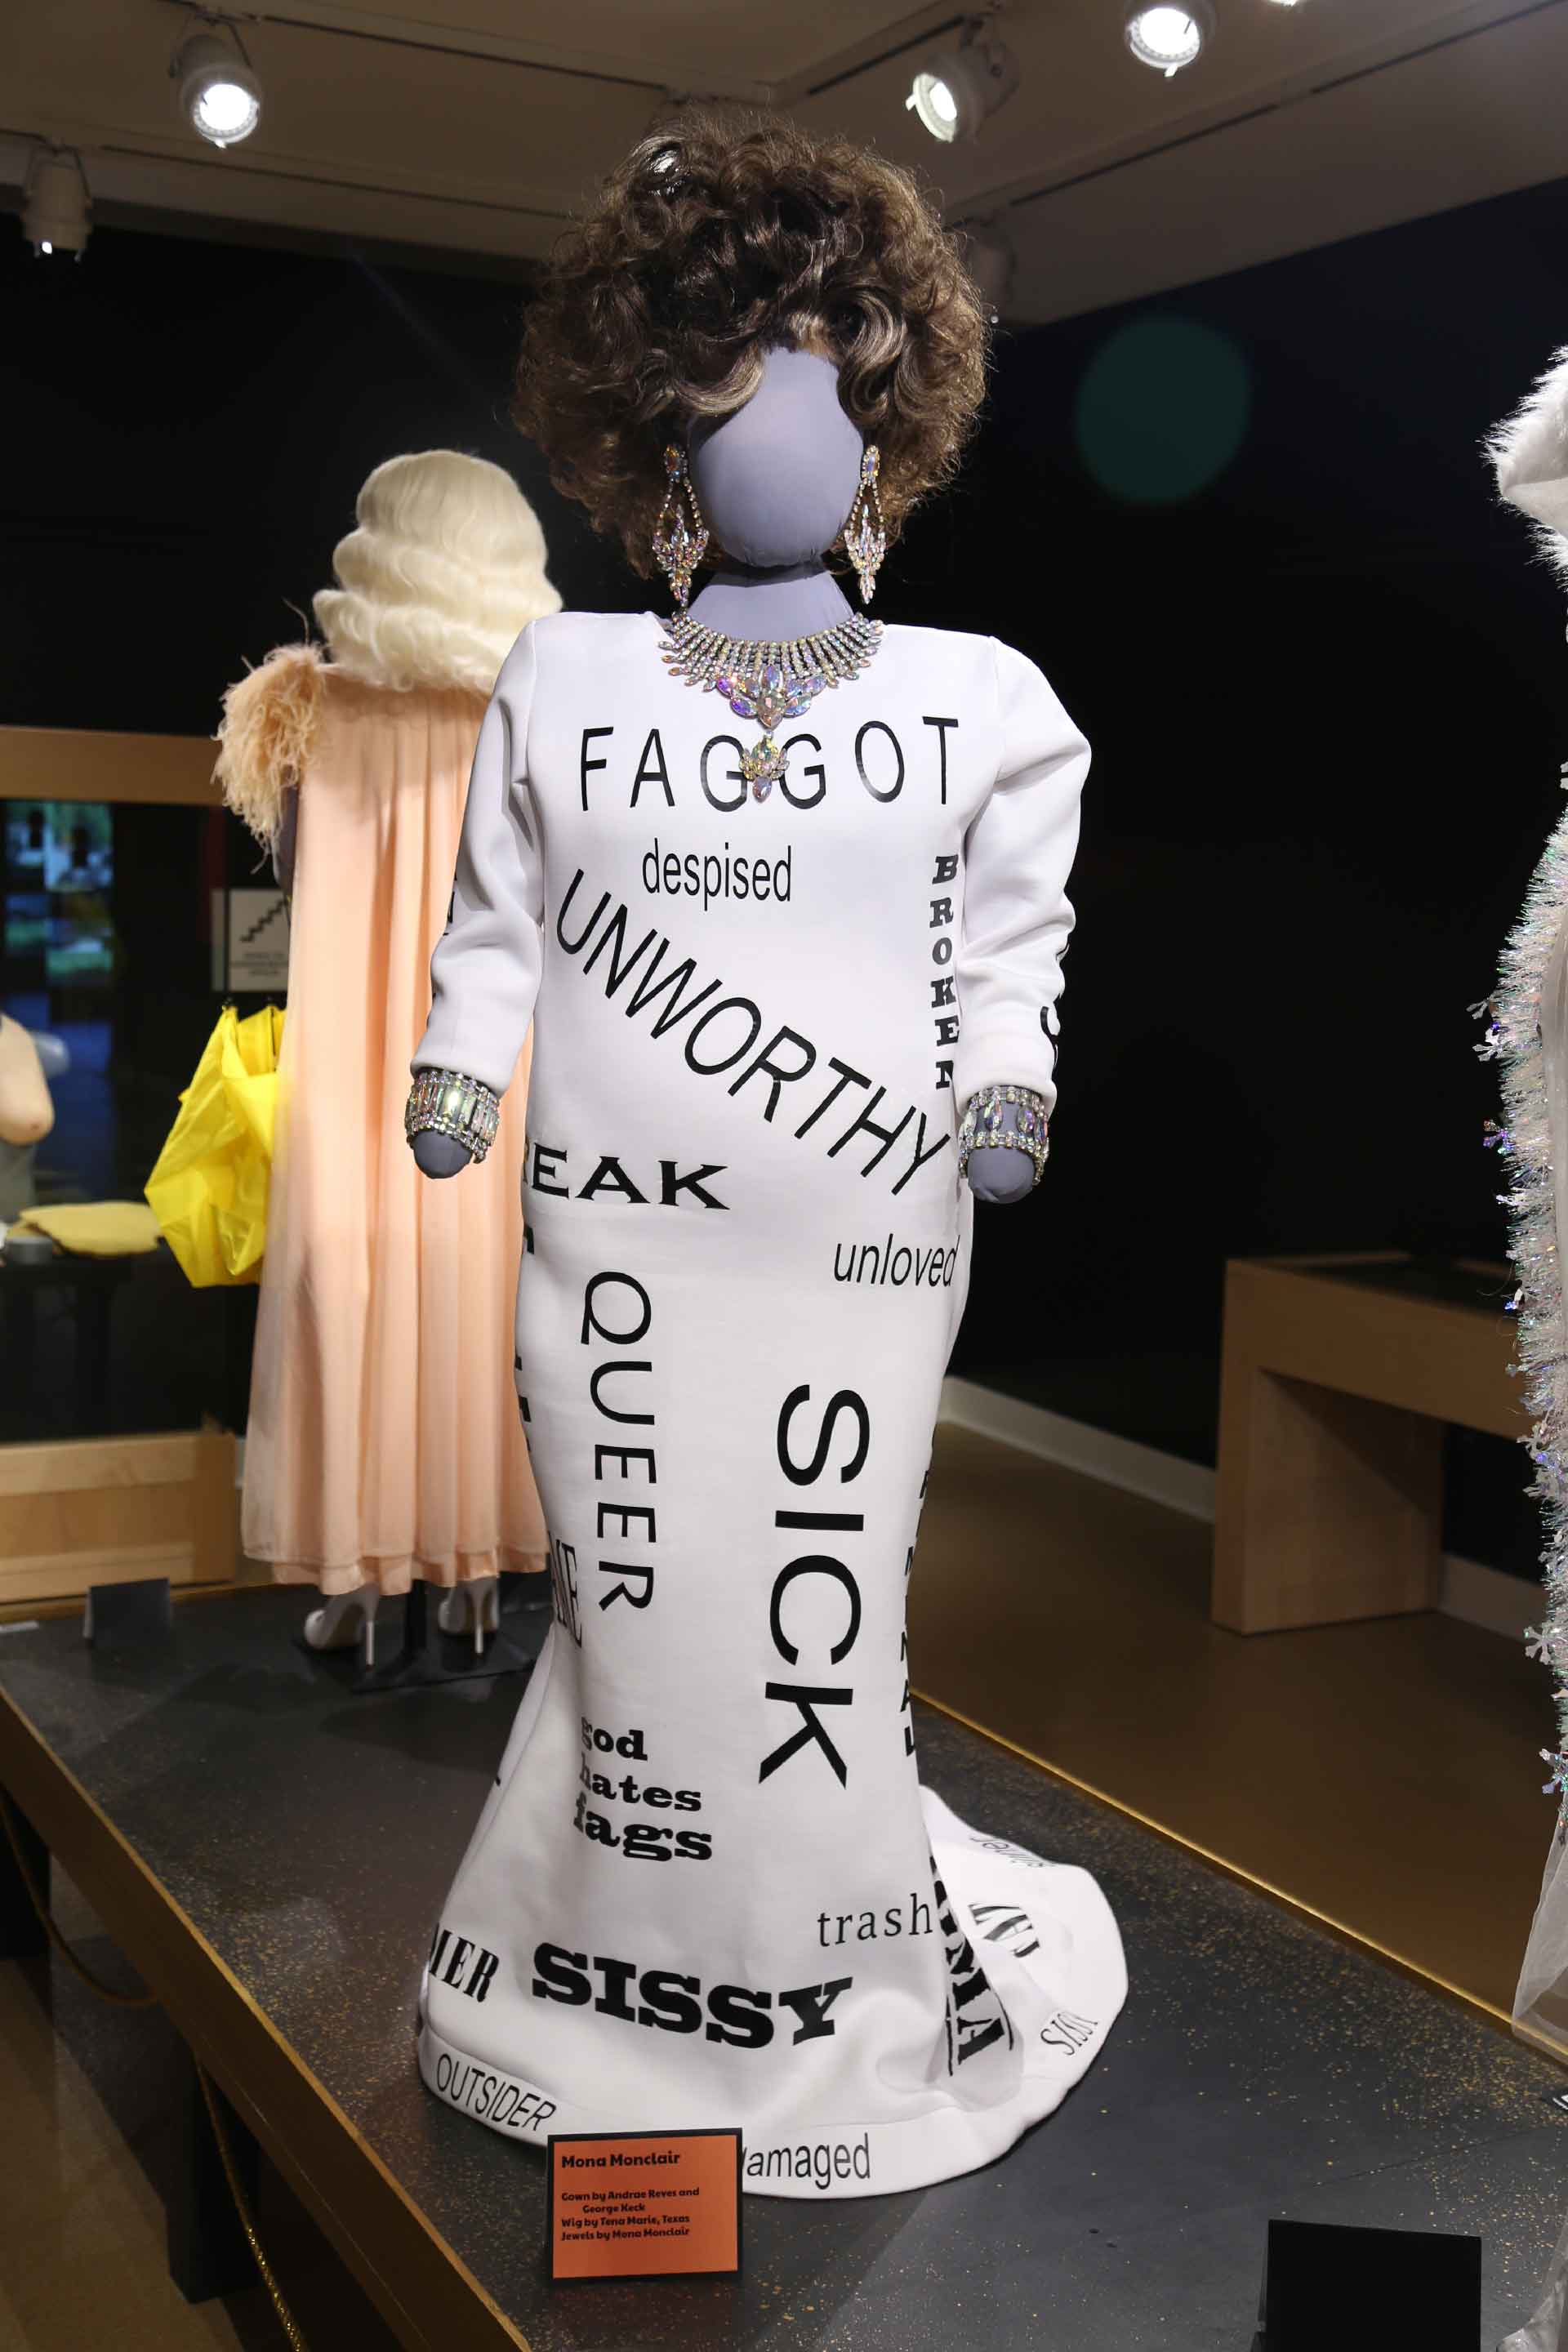 Drag queen dressed in white dress with black text on it